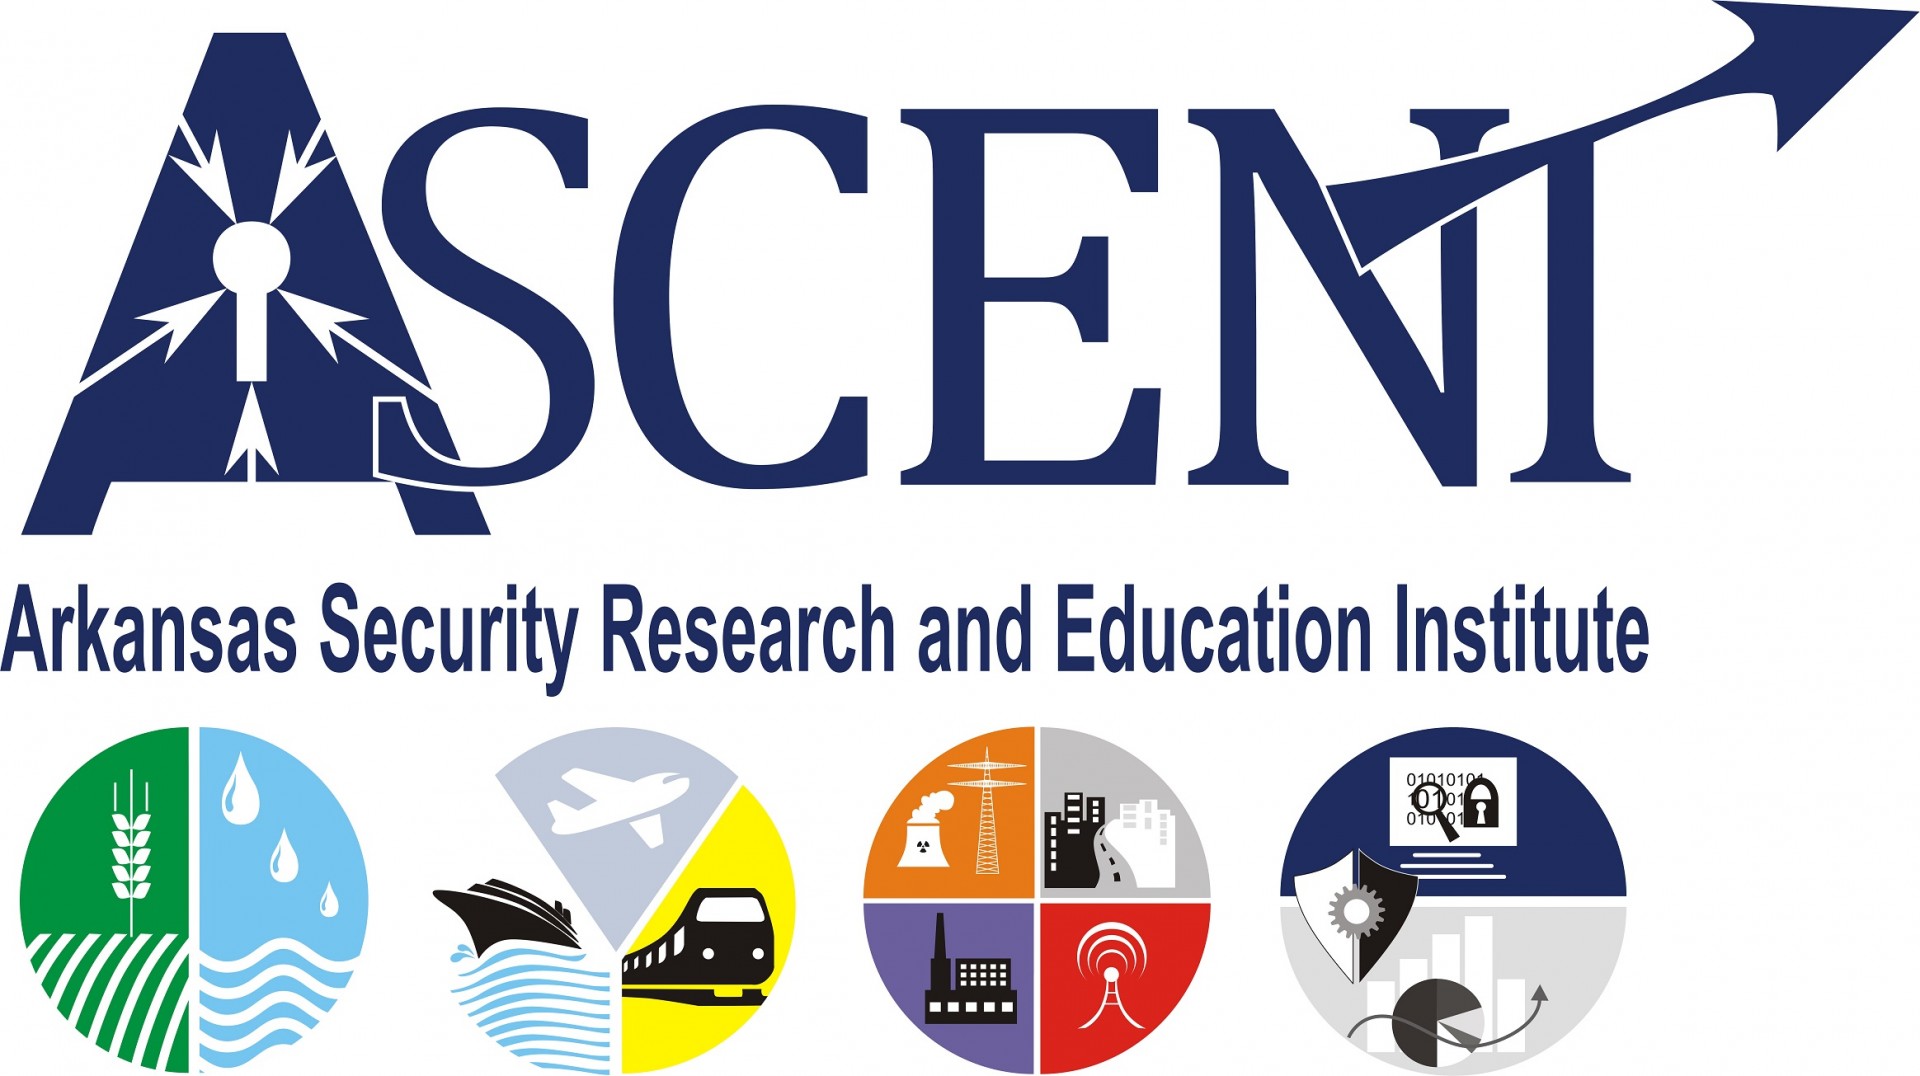 Arkansas Security Research and Education Institute